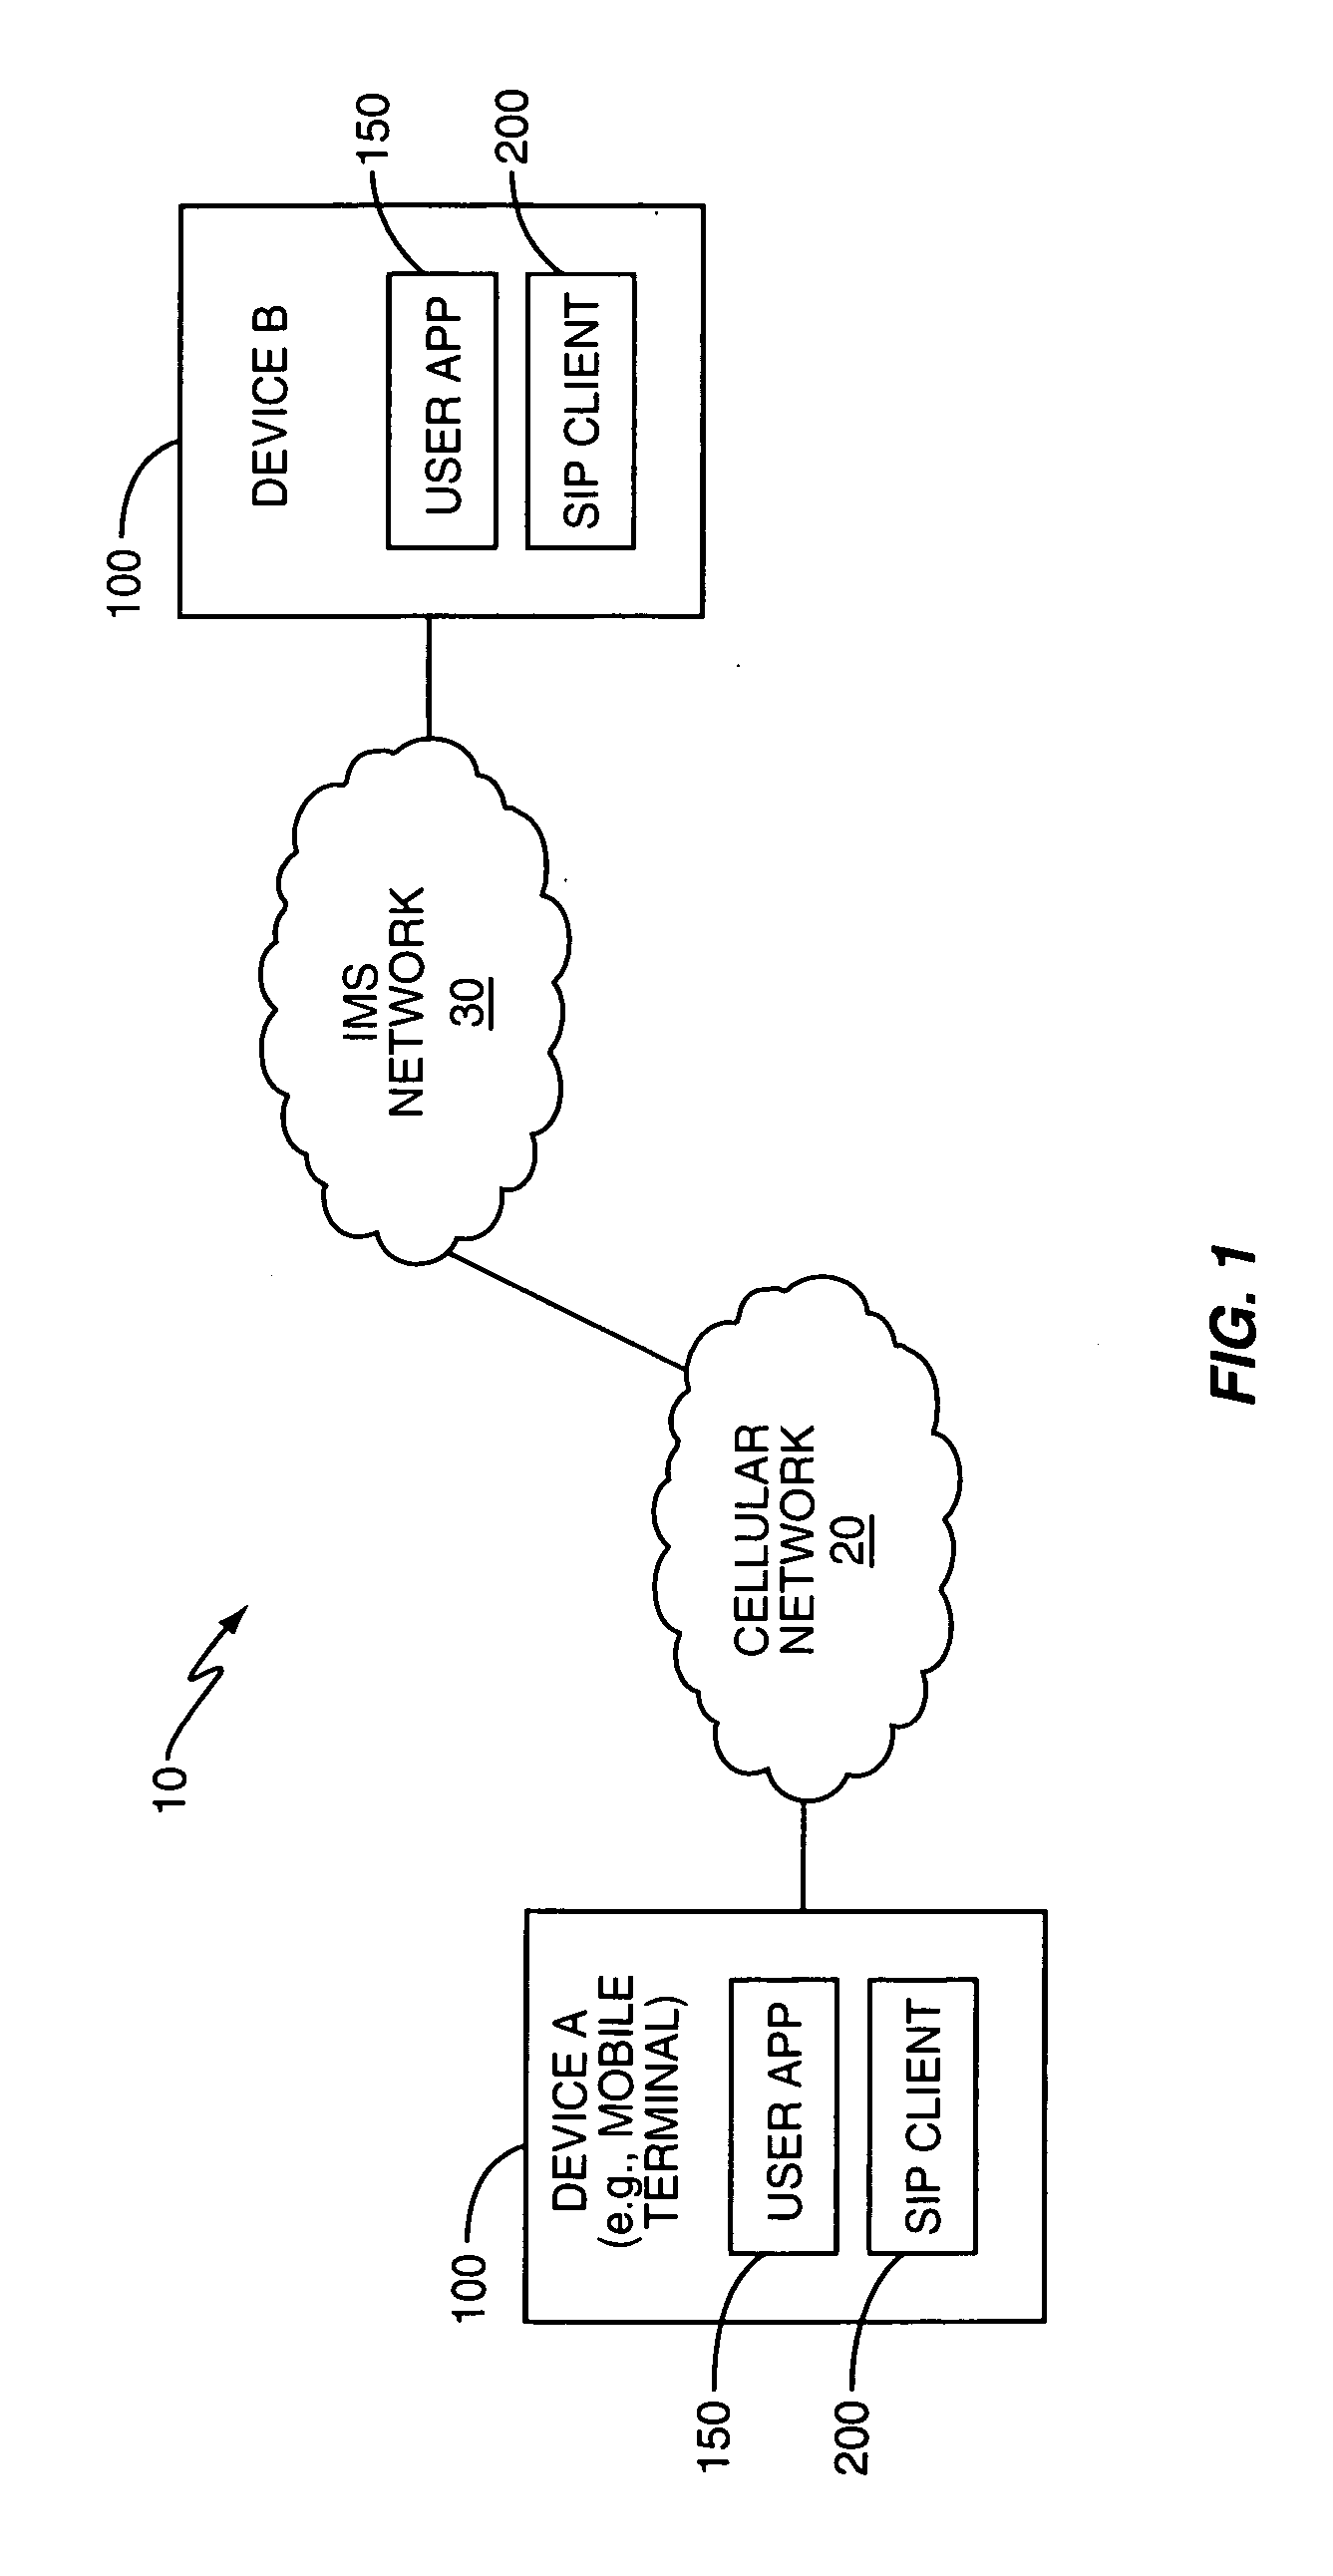 Multi-user media client for communication devices